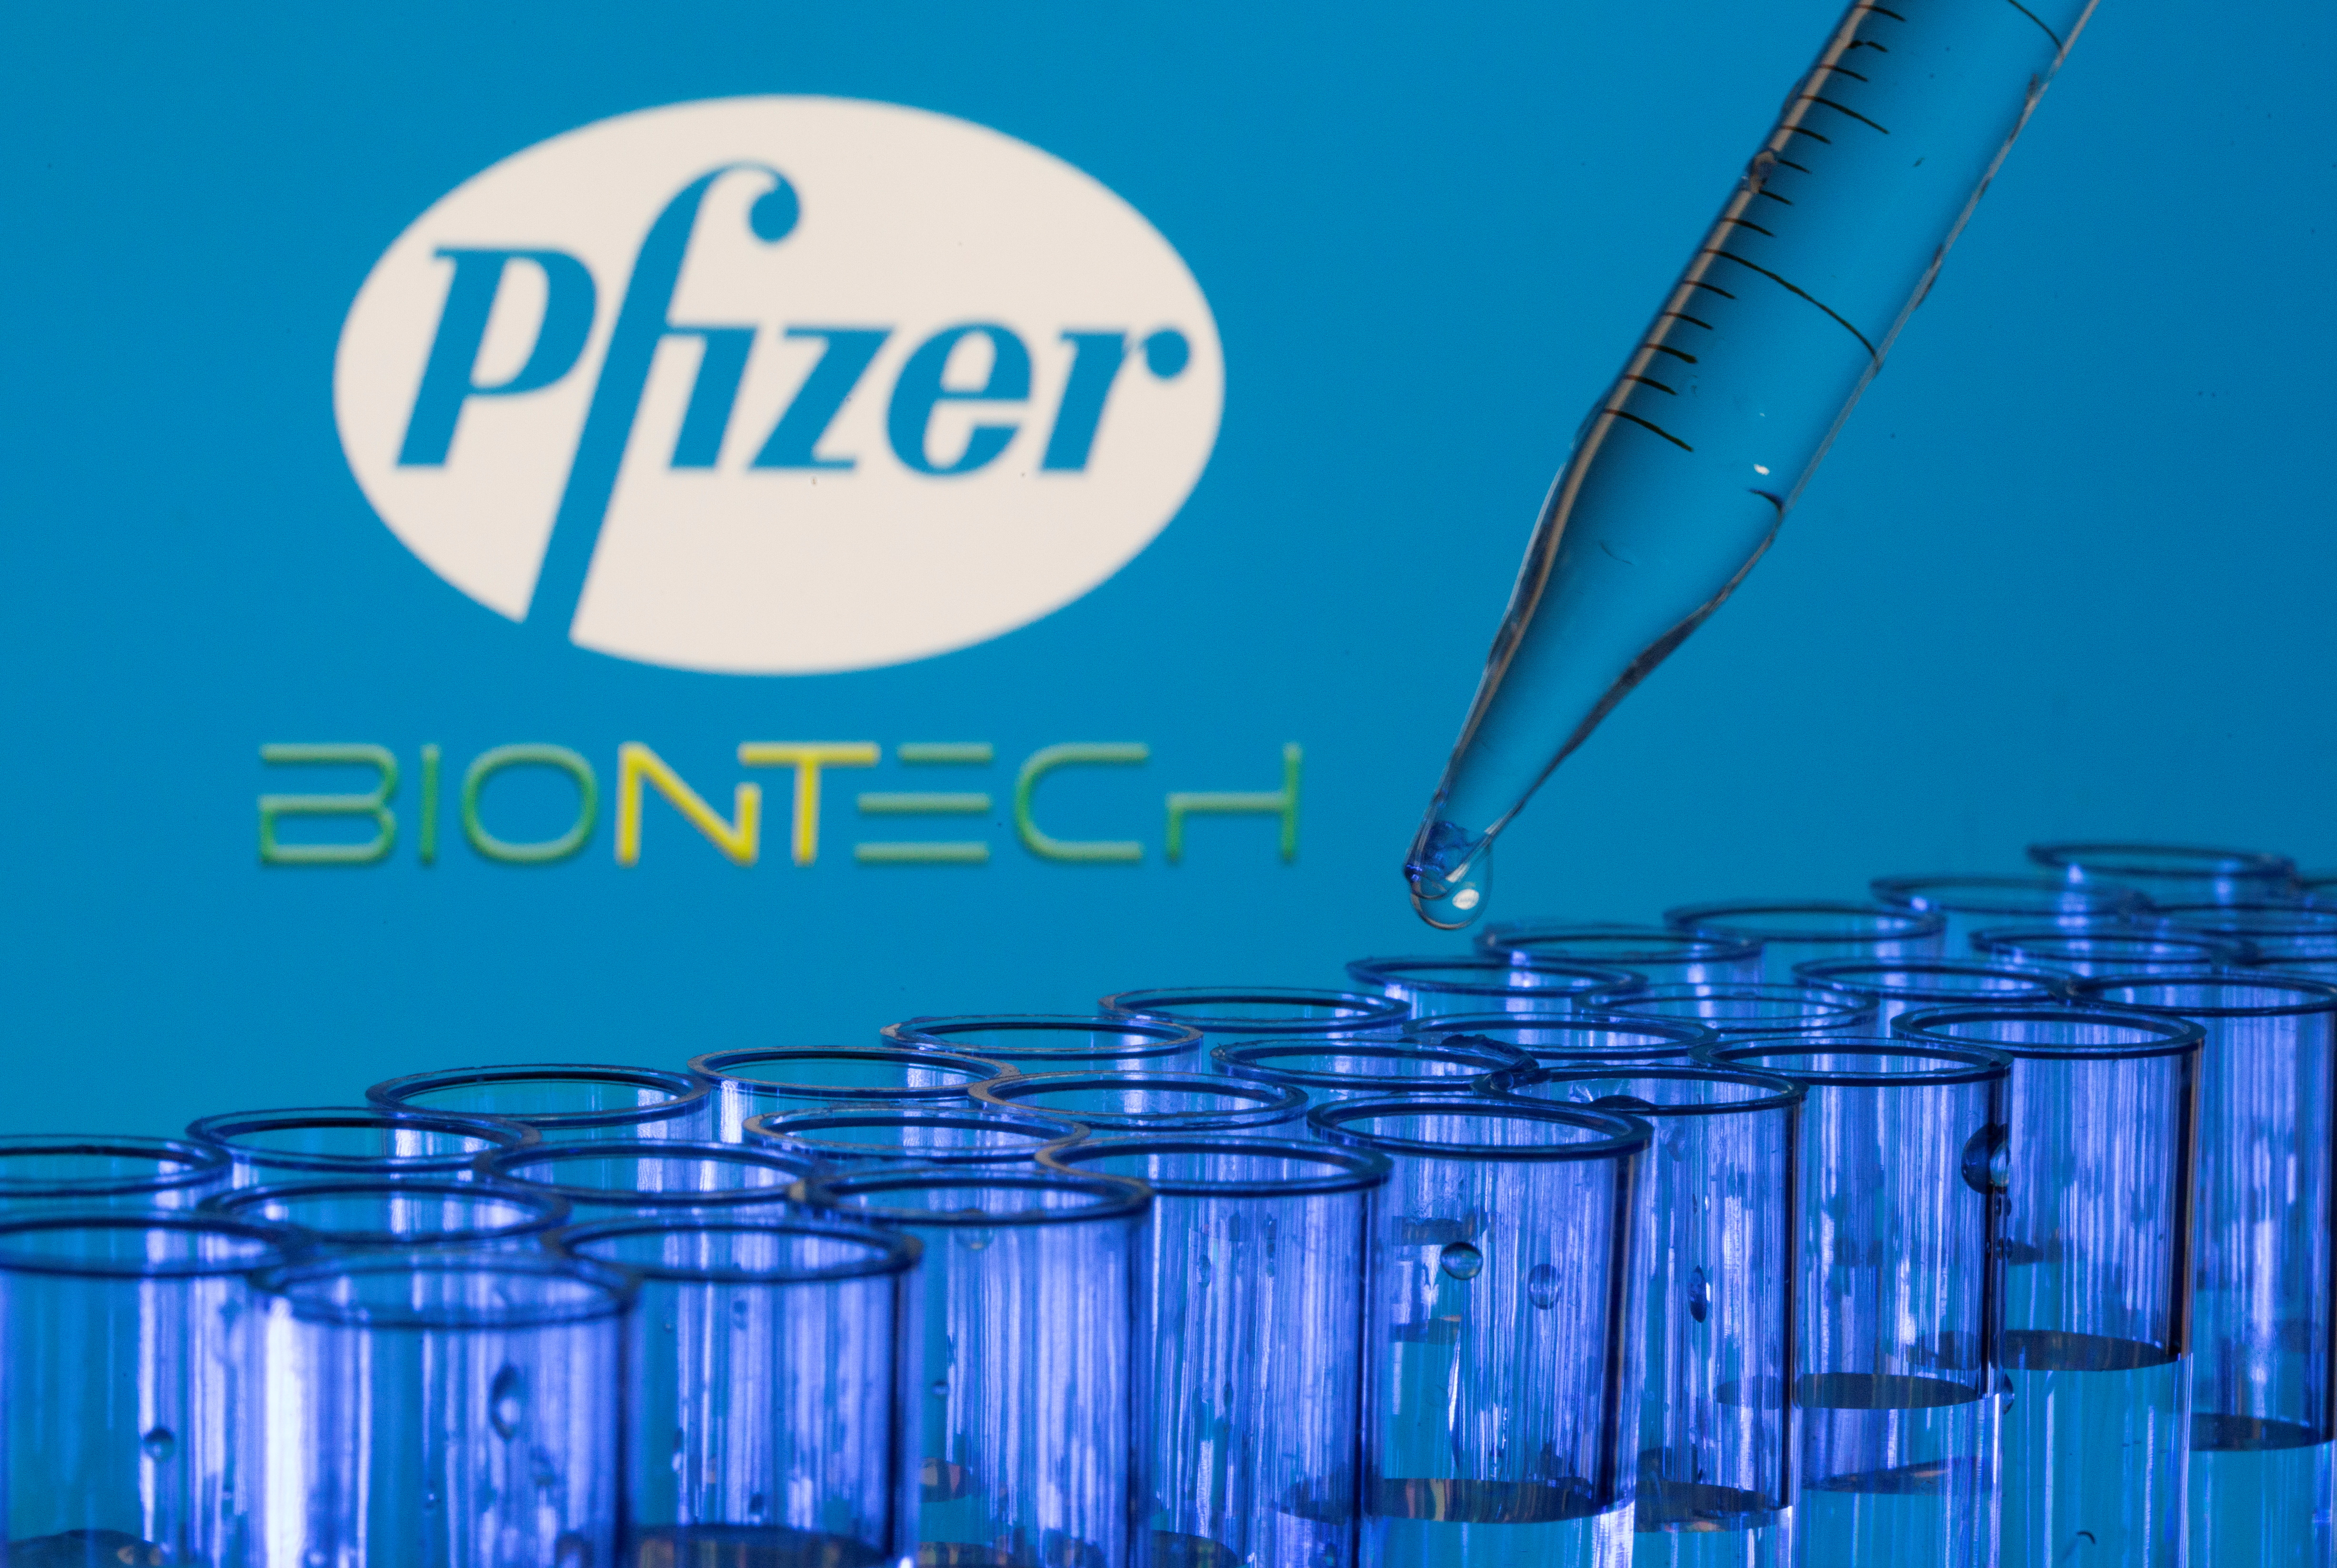 Test tubes are seen in front of displayed Pfizer and Biontech logos in this illustration